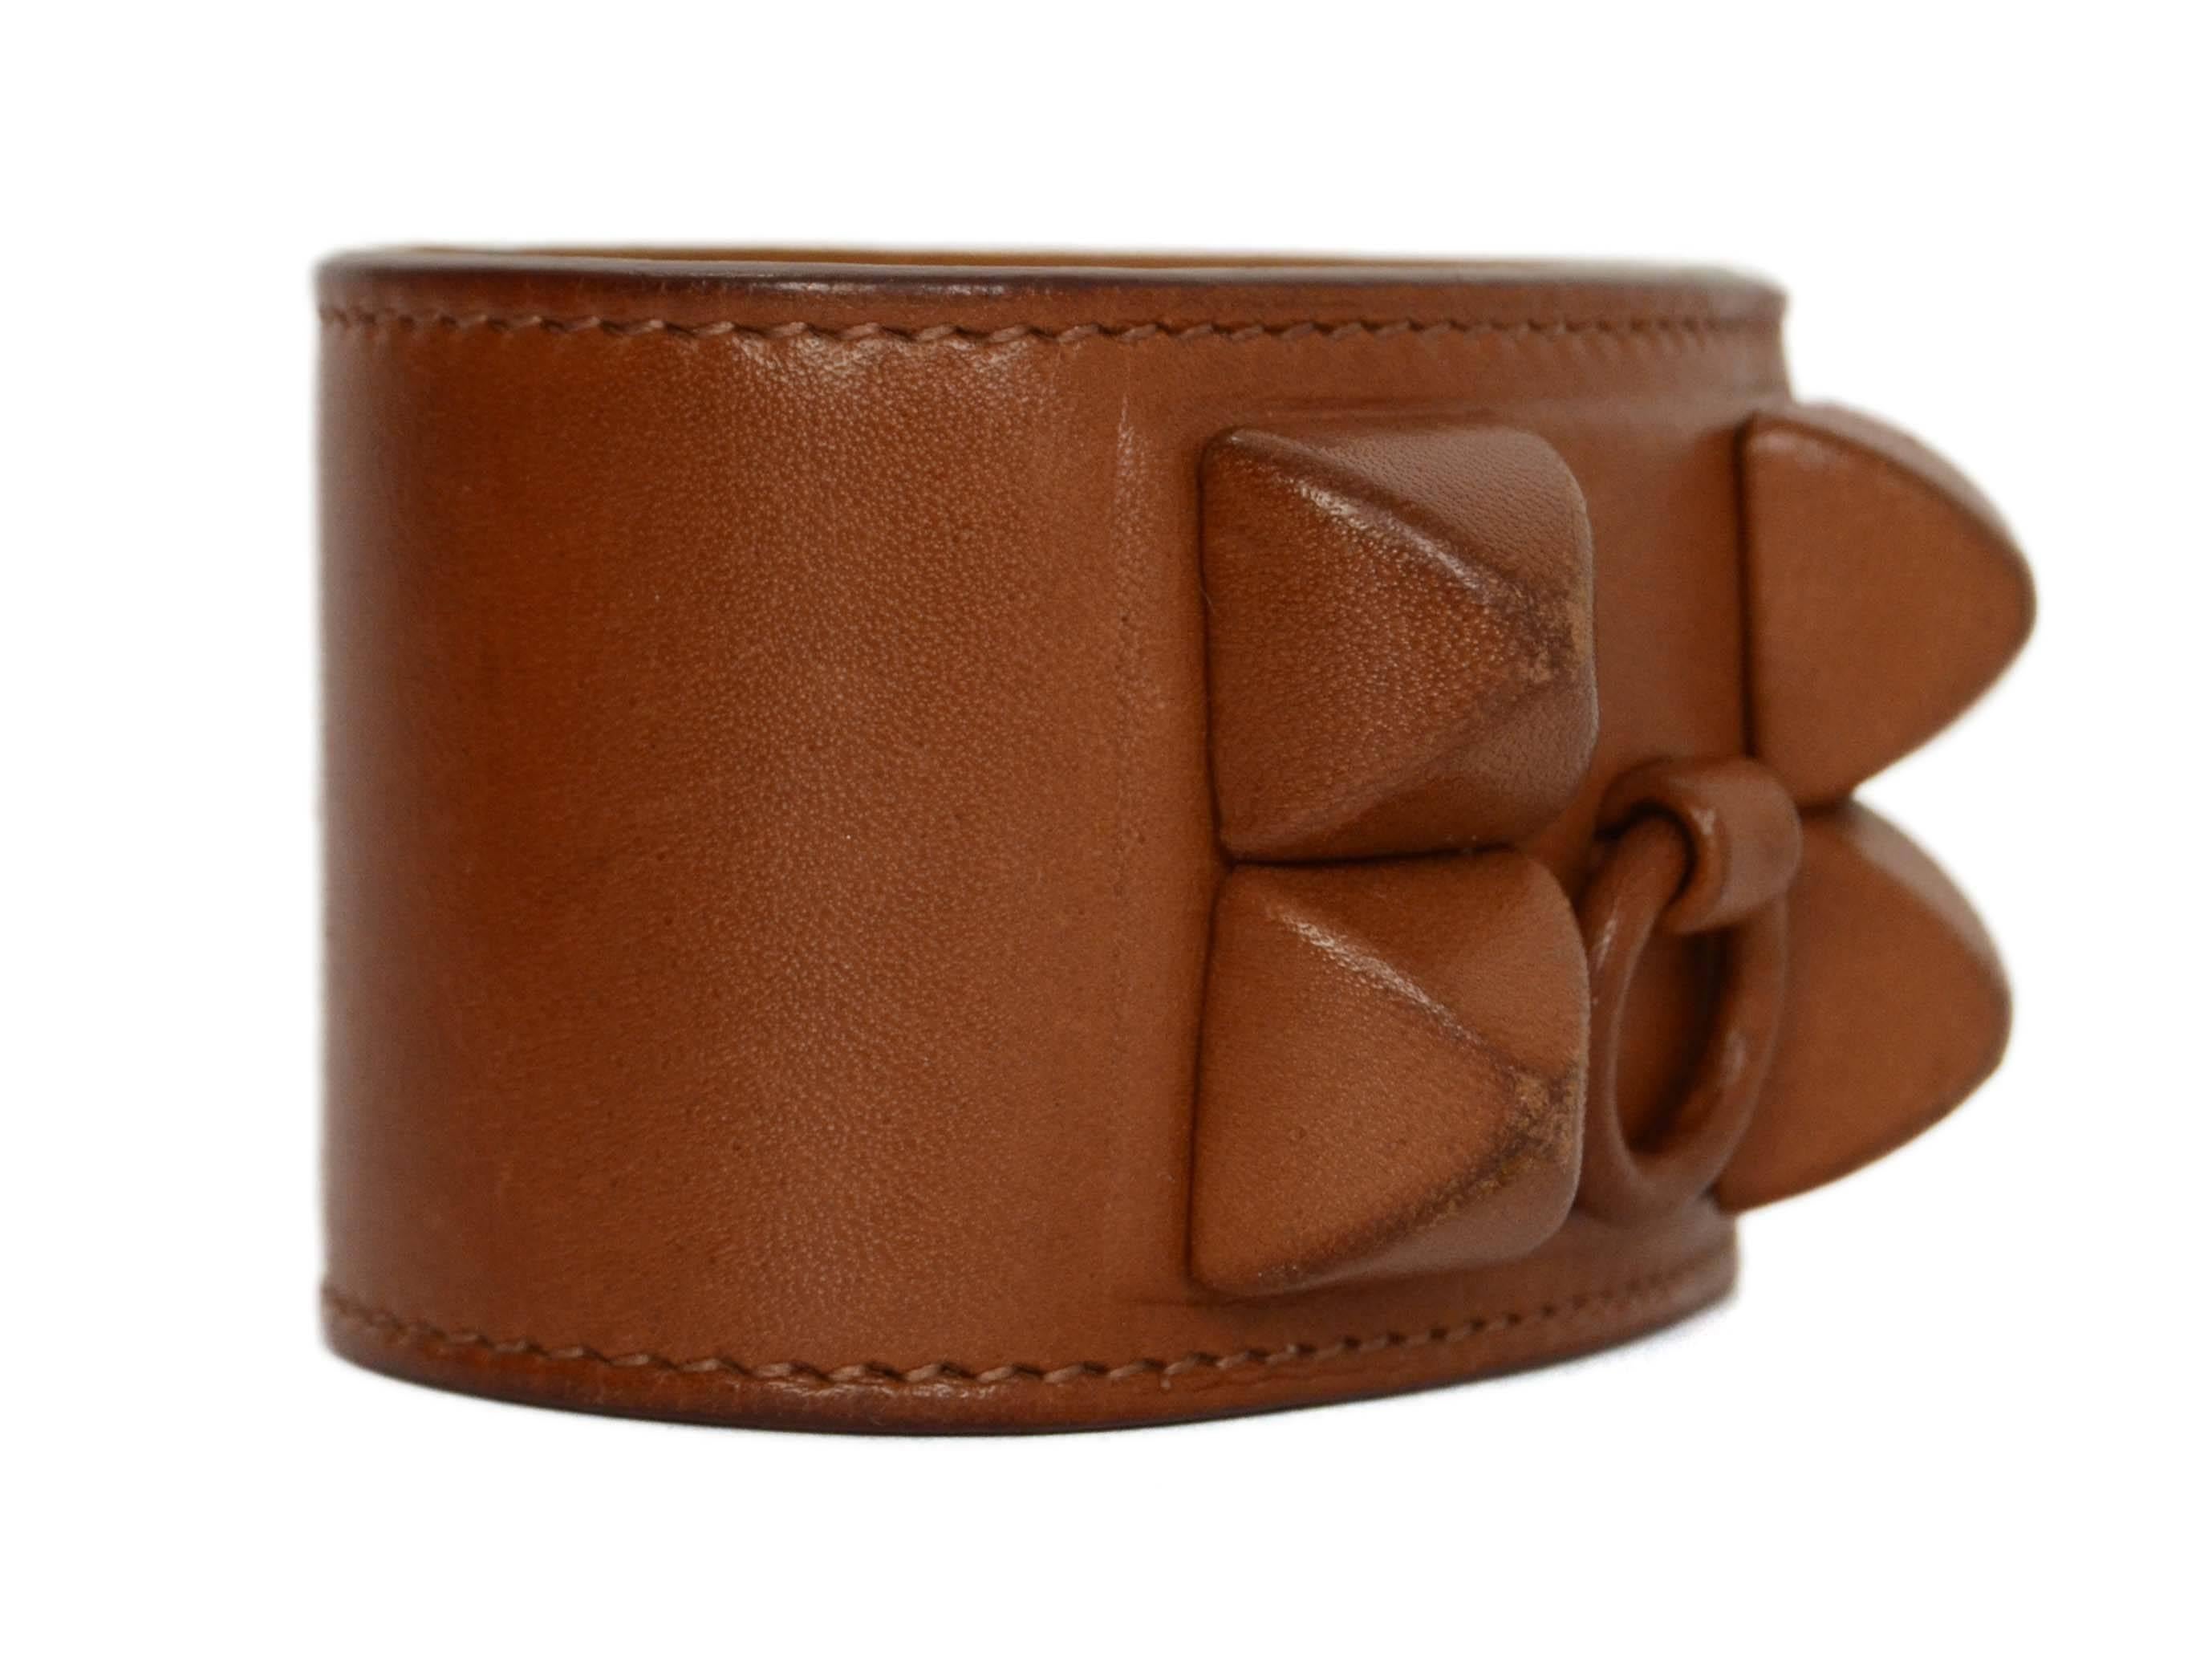 Hermes Brown Leather 'Shadow' CDC Cuff 
Features brown leather wrapped hardware
Made In: France
Year of Production: 2009
Color: Brown
Materials: Leather
Closure: Double snap closure
Stamp: M stamp in square
Overall Condition: Very good